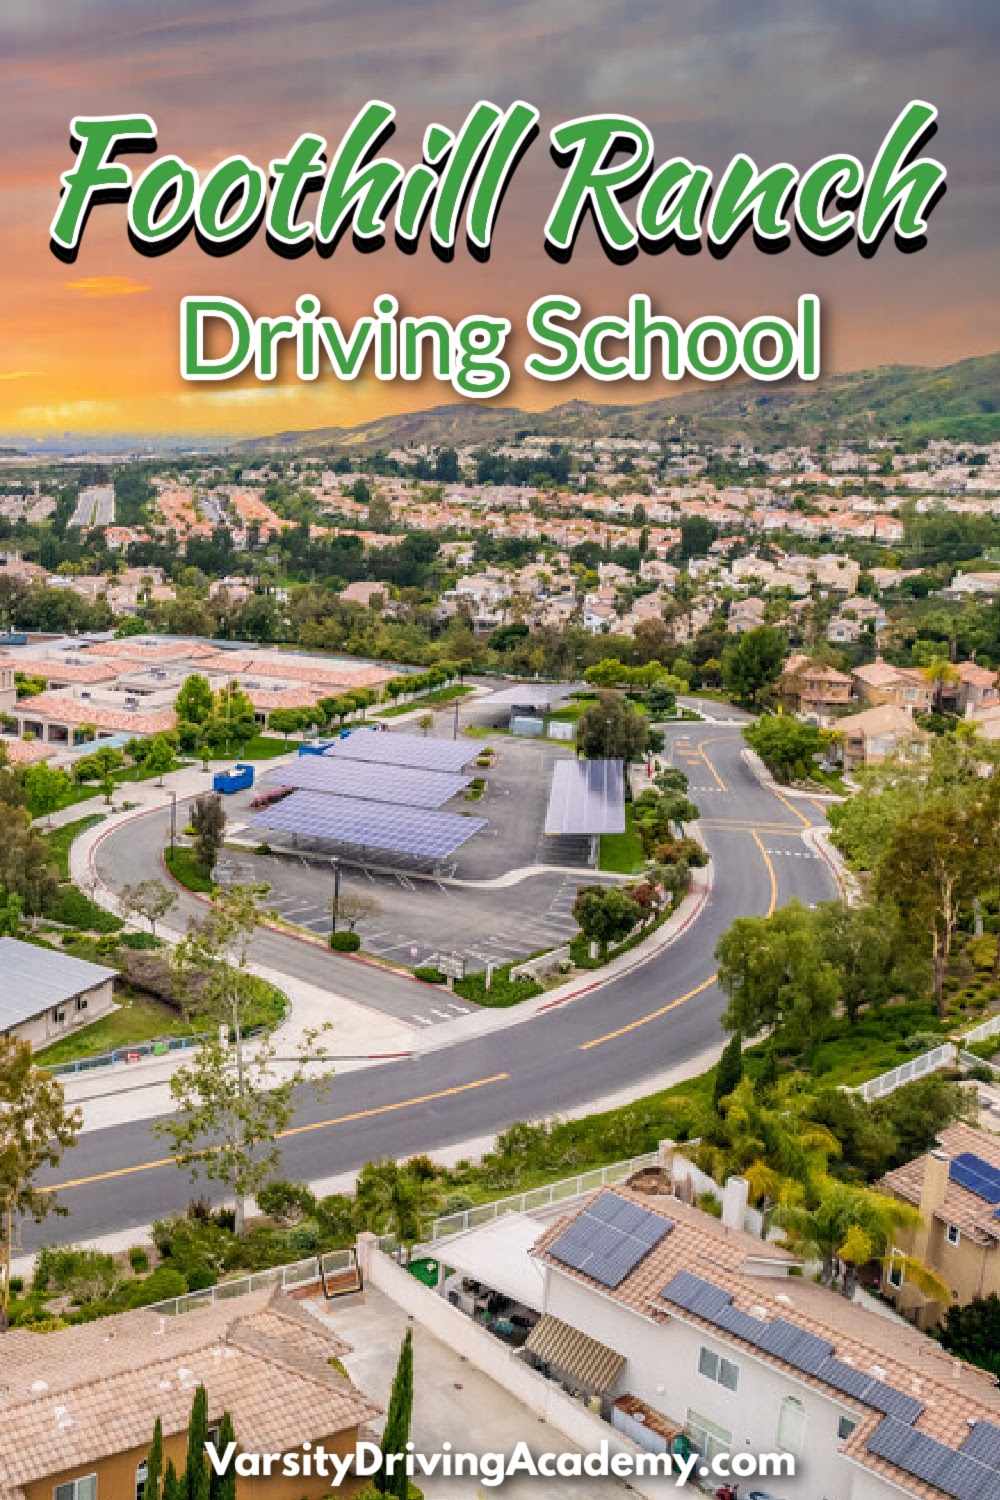 Welcome to Varsity Driving Academy, your #1 rated Foothill Ranch driving school.